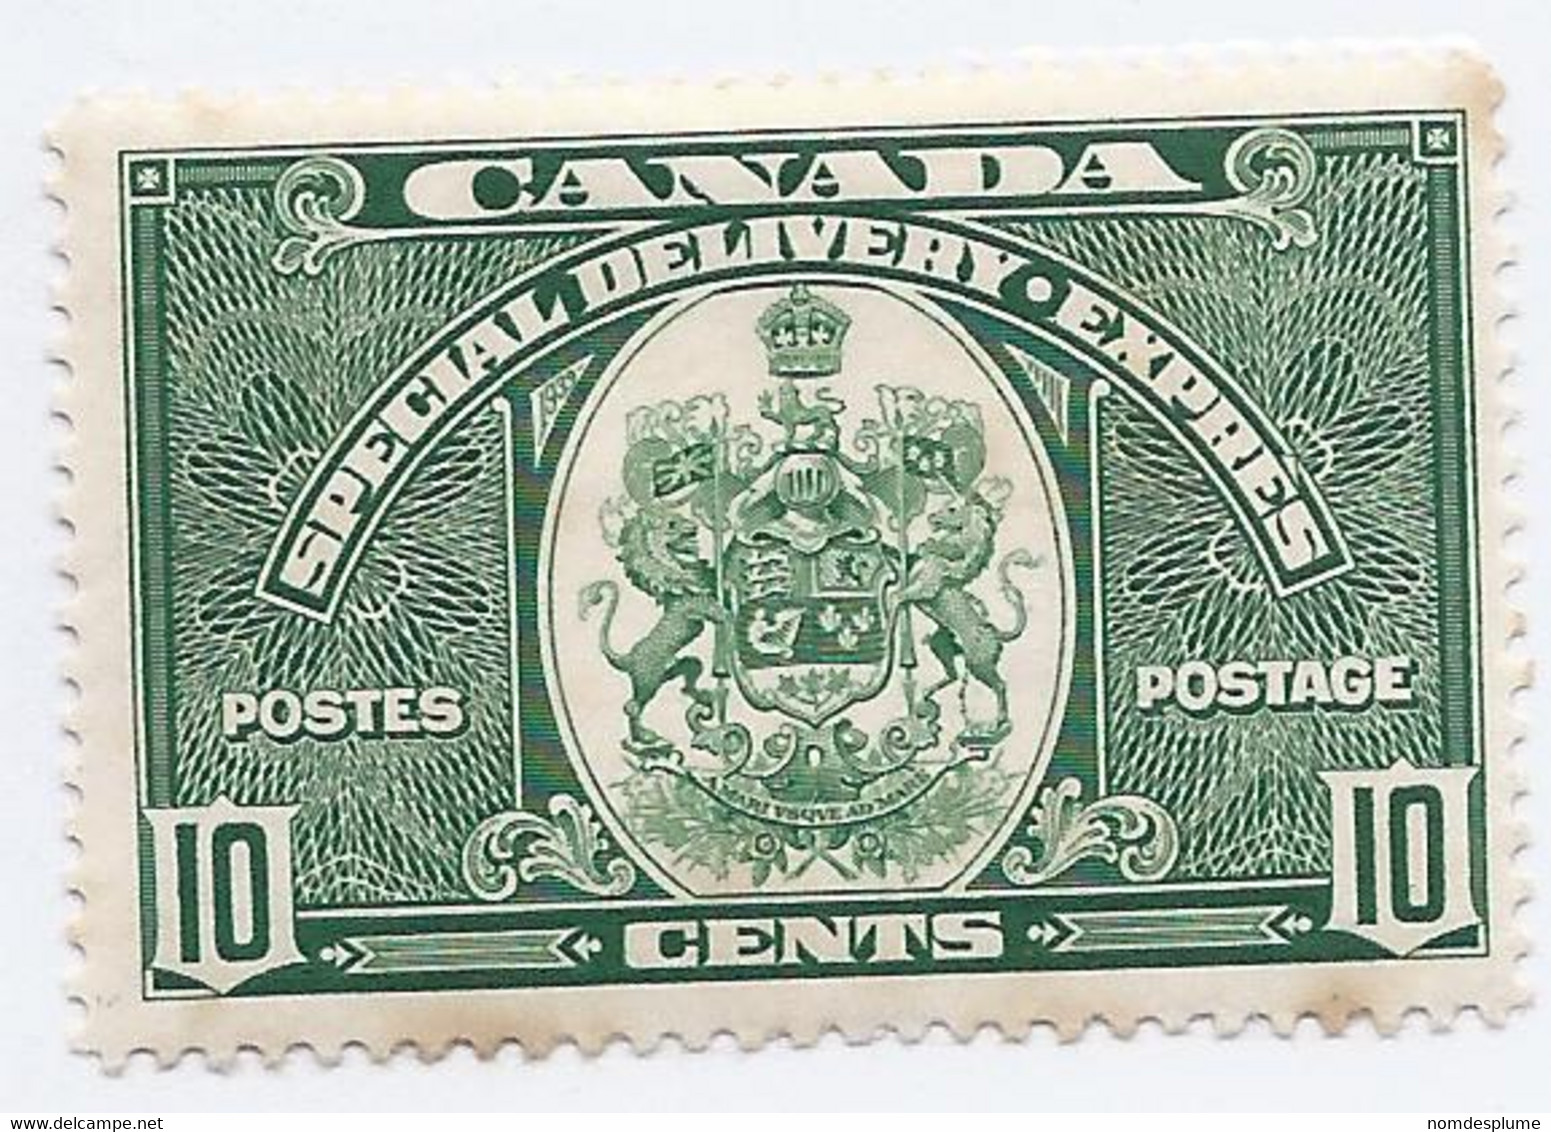 15986) Canada 1938  Mint Hinge Special Delivery - Special Delivery